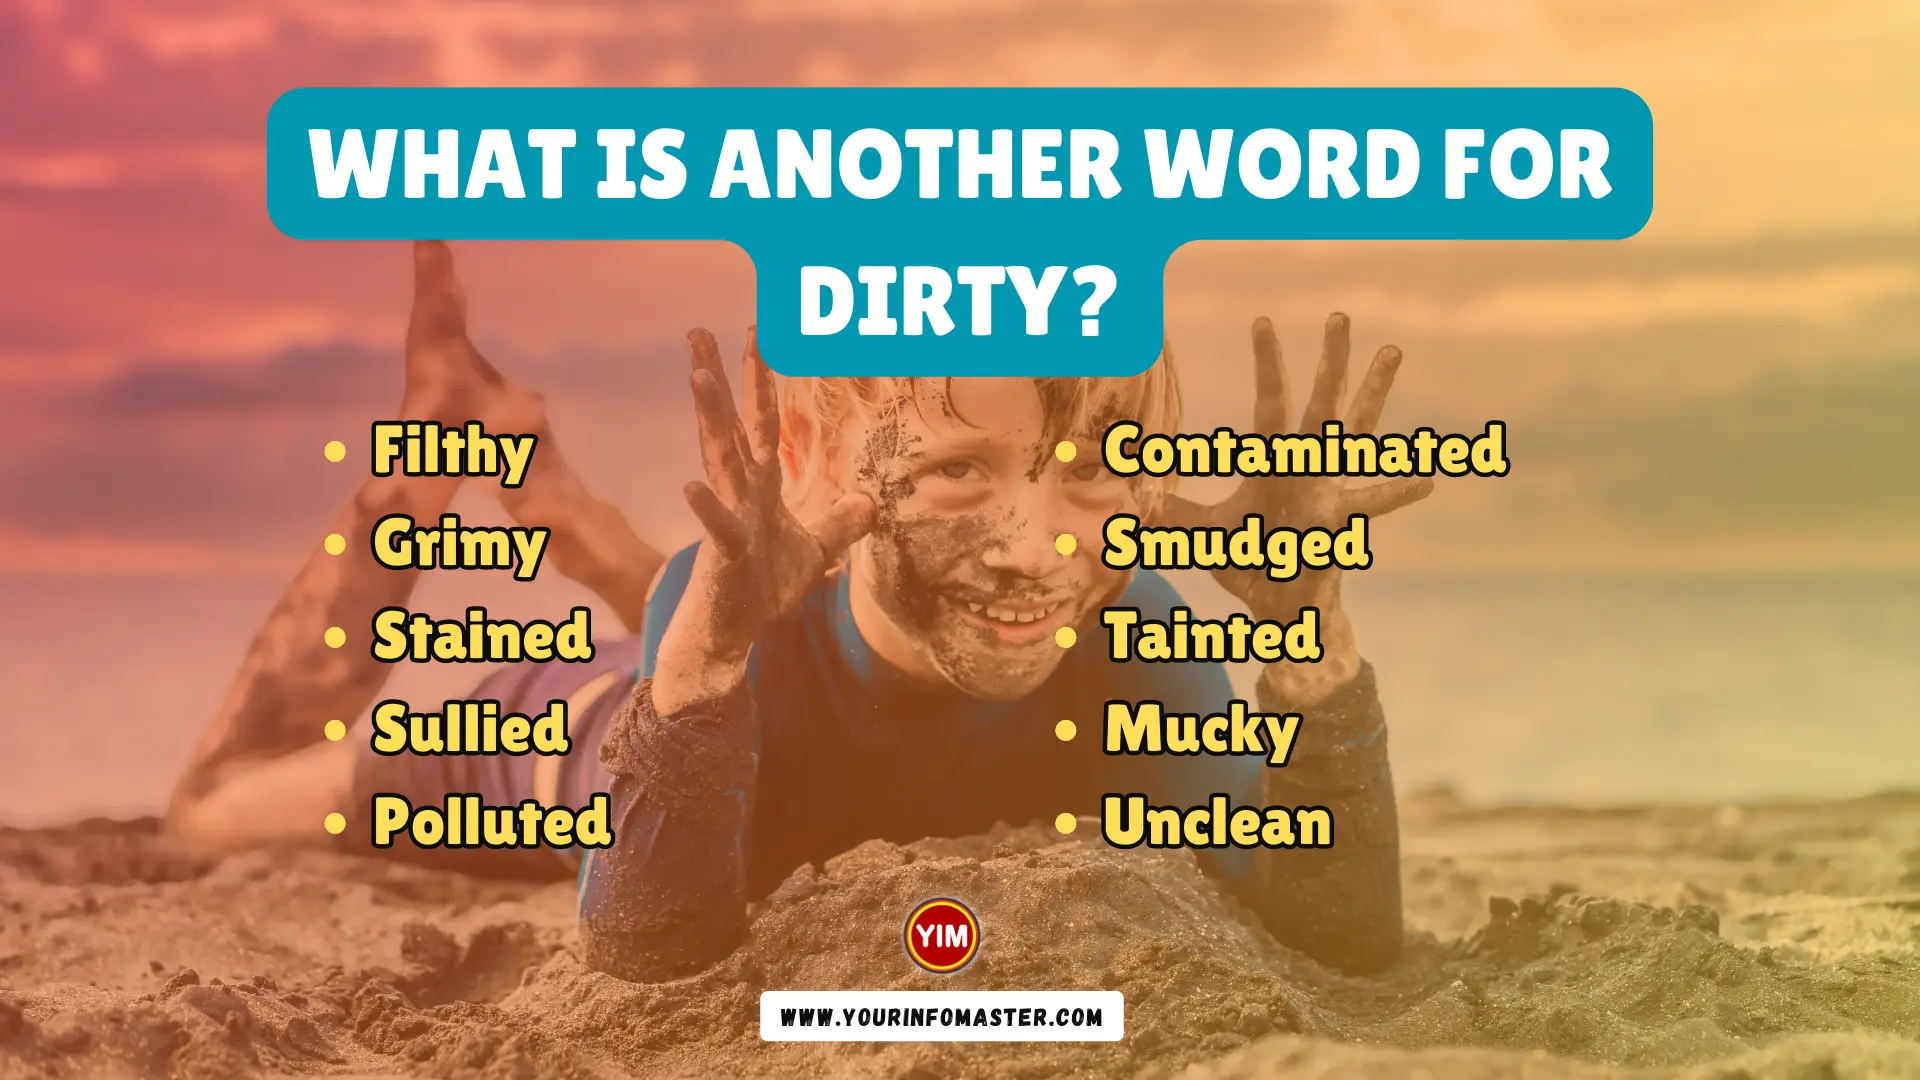 What is another word for Dirty